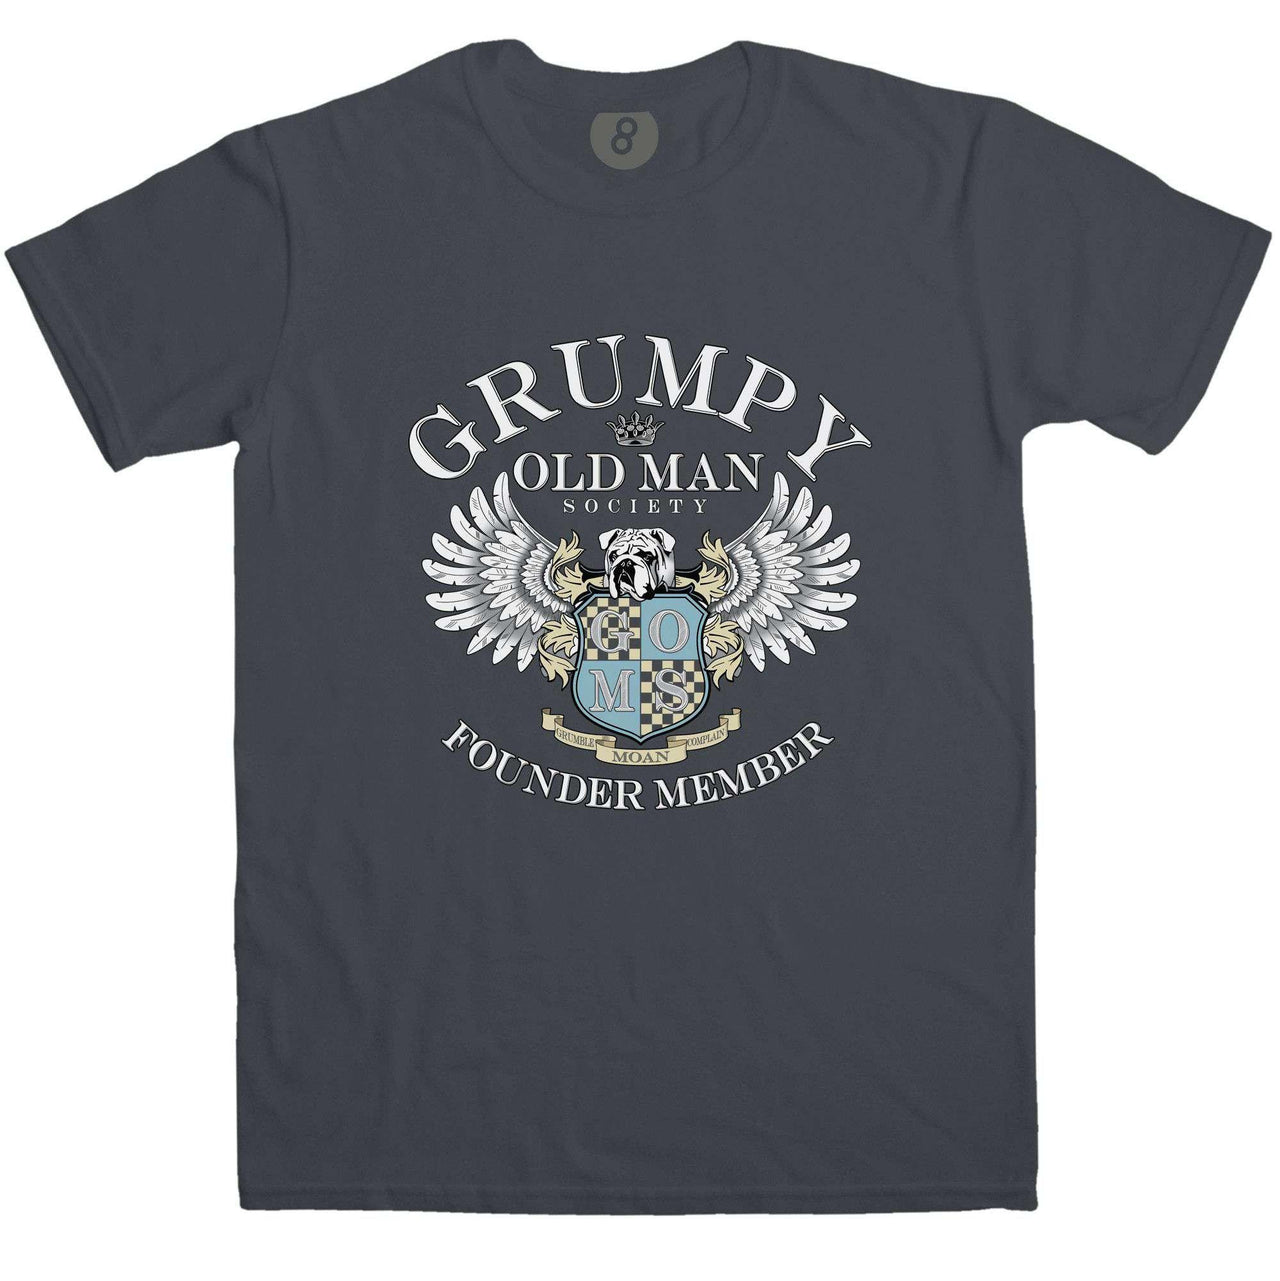 Grumpy Old Man Society Founder Member Unisex T-Shirt For Men And Women 8Ball